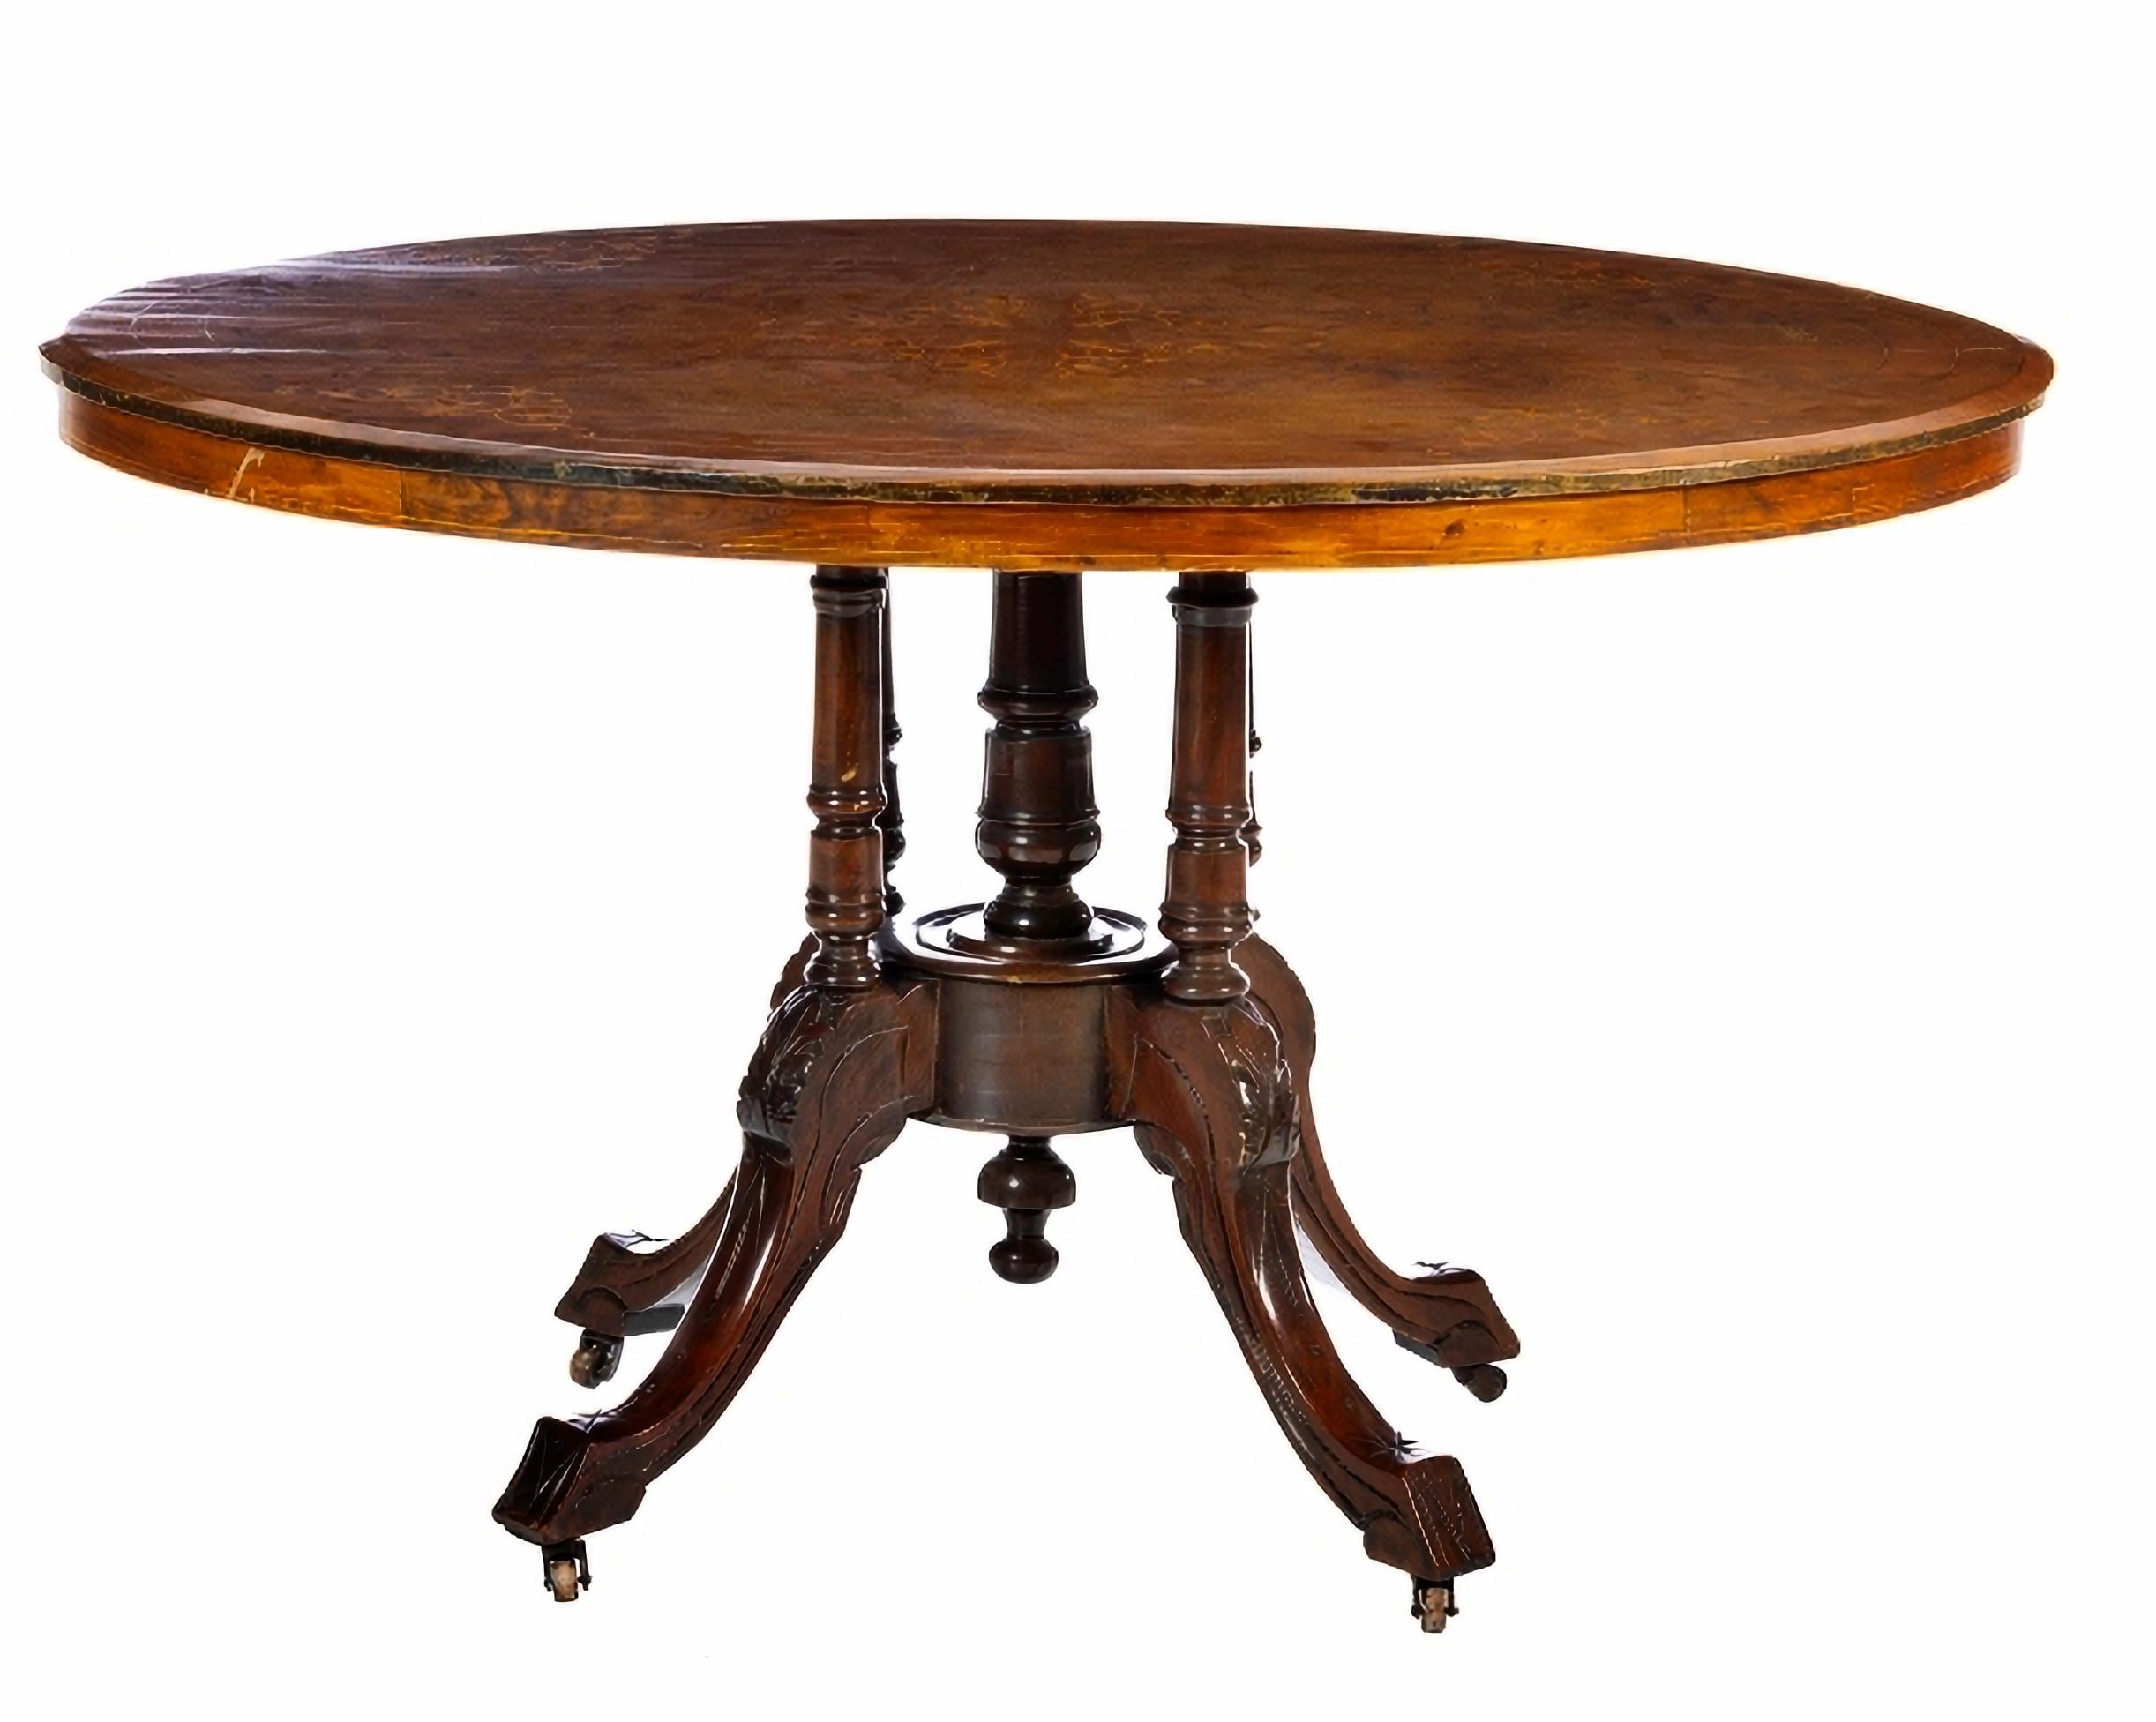 British Colonial Beautiful English Center Table 19th Century For Sale